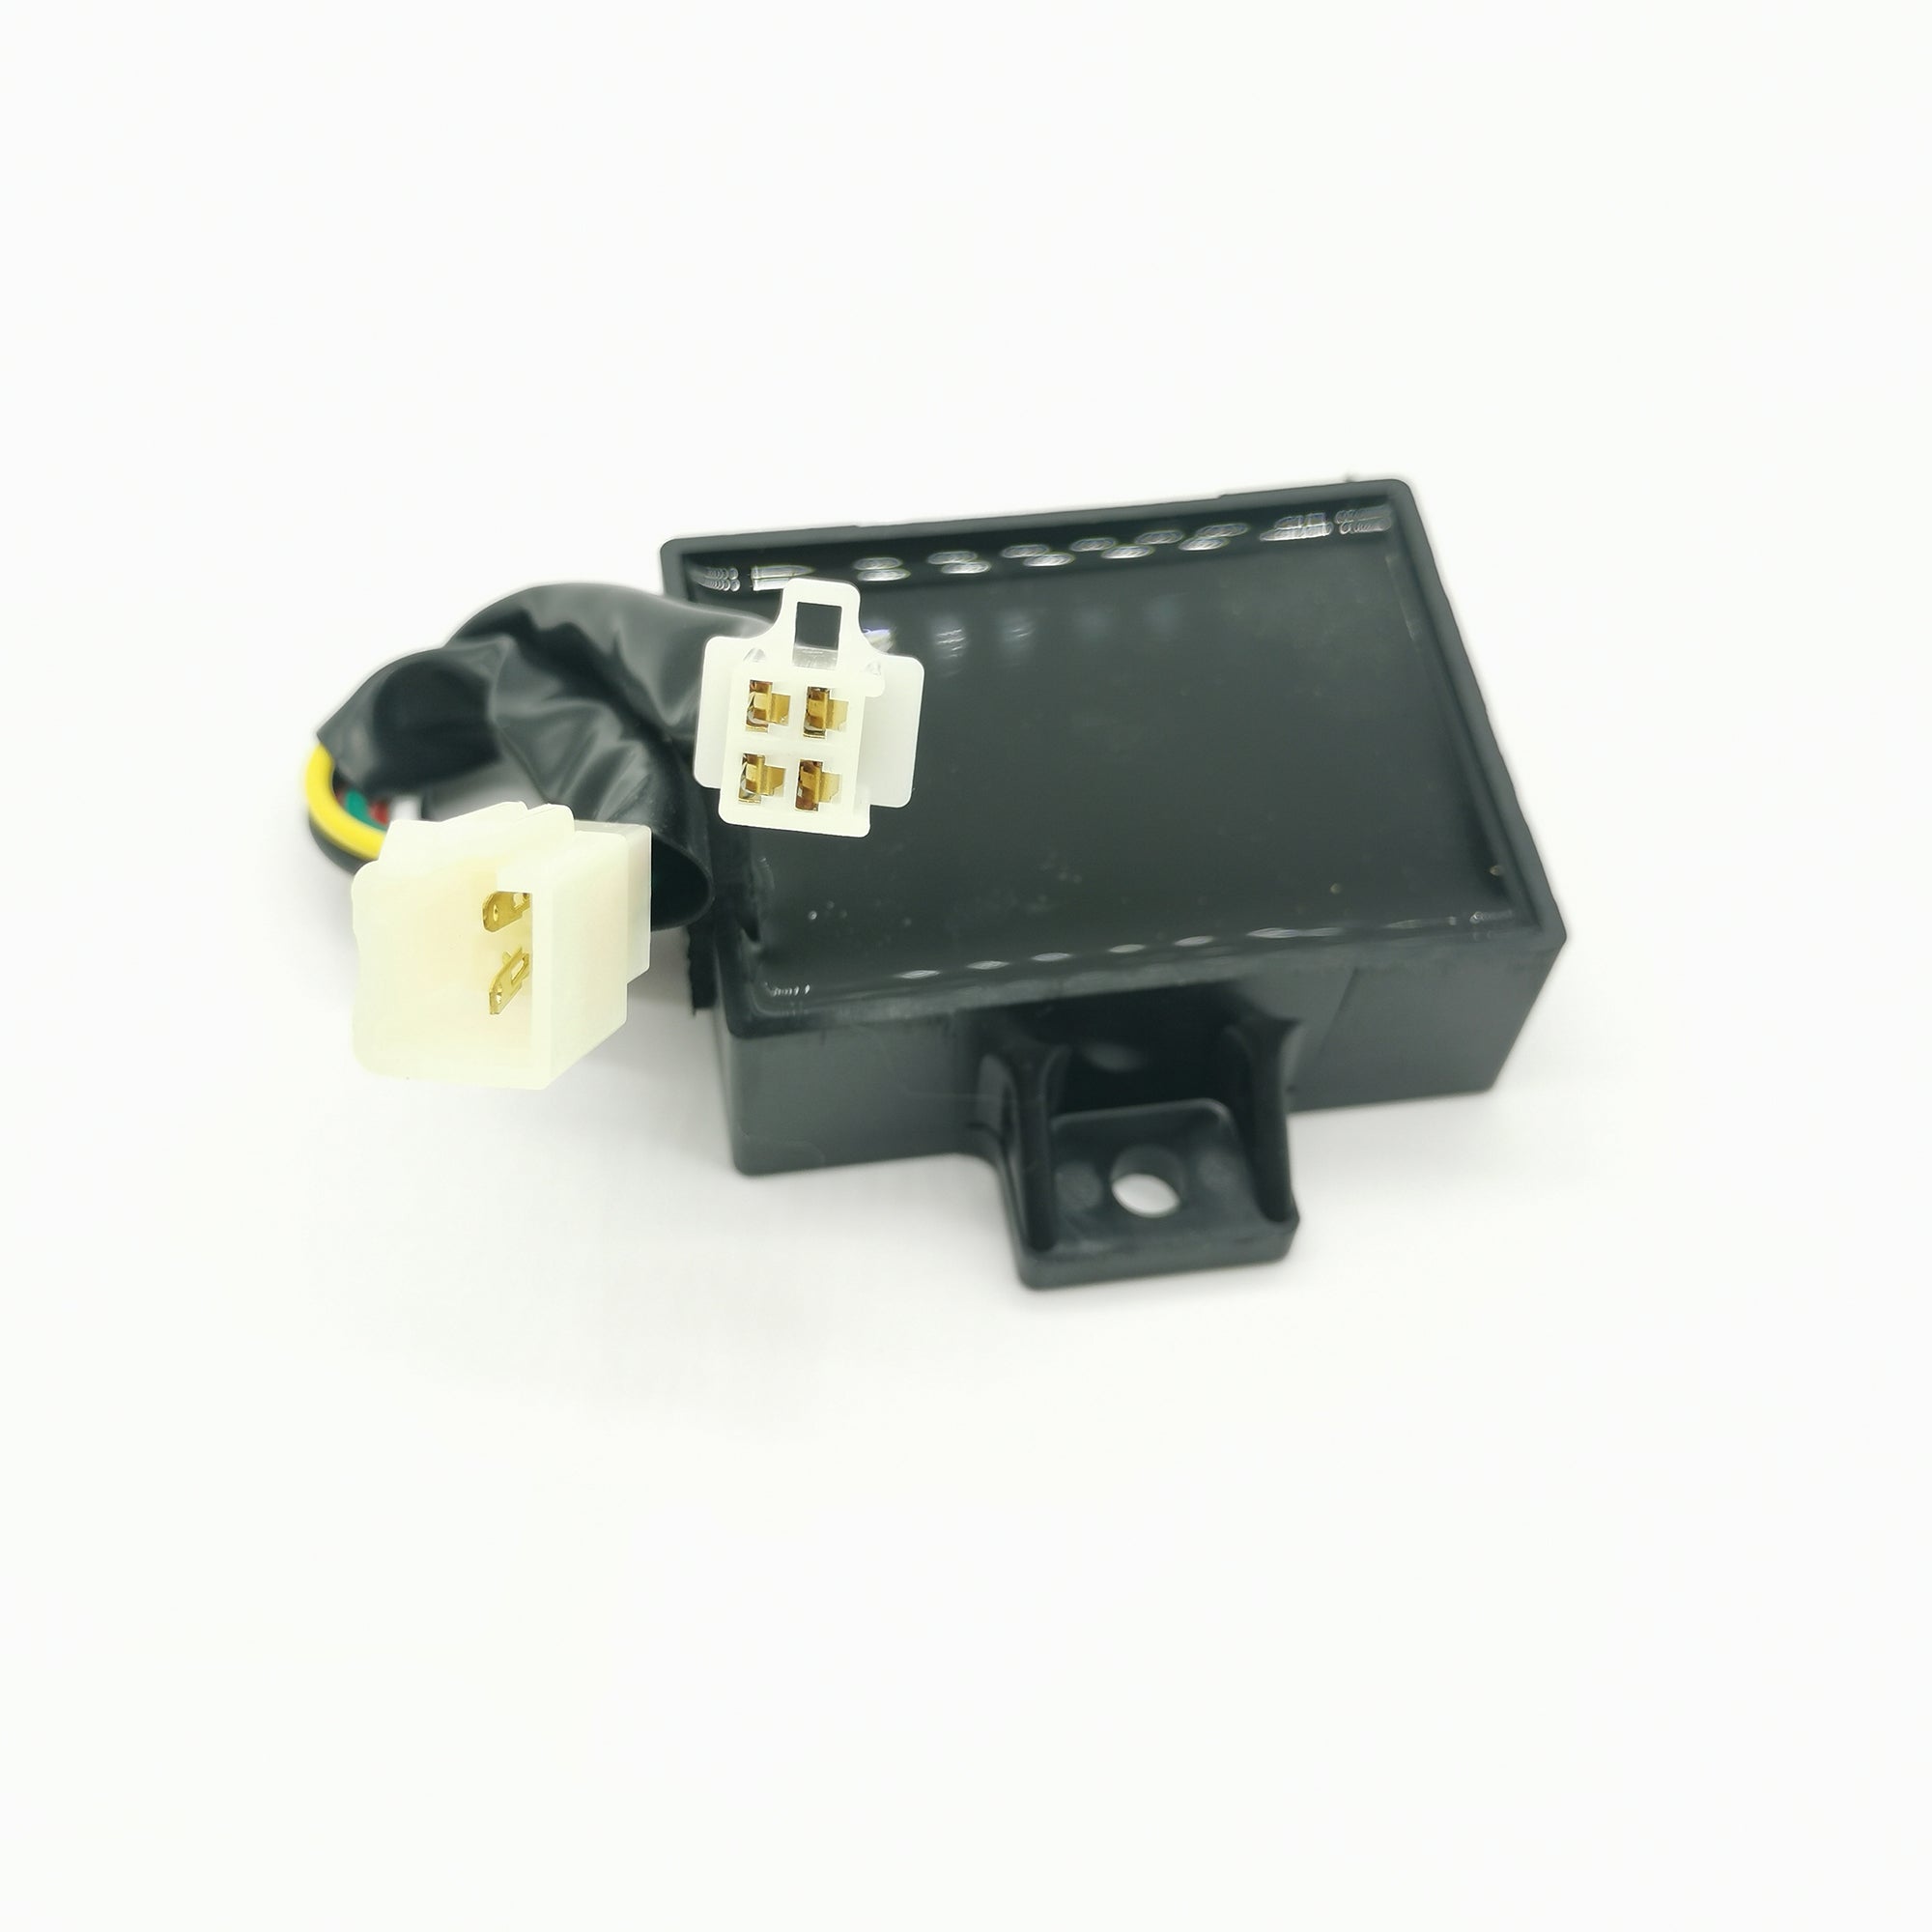 New Ignitor for AM105574 JD Equipment, for Kawasaki 21119-2157, Tractors, LAWNMOWERS, 14D, Fits FD501V FD620D - KUDUPARTS